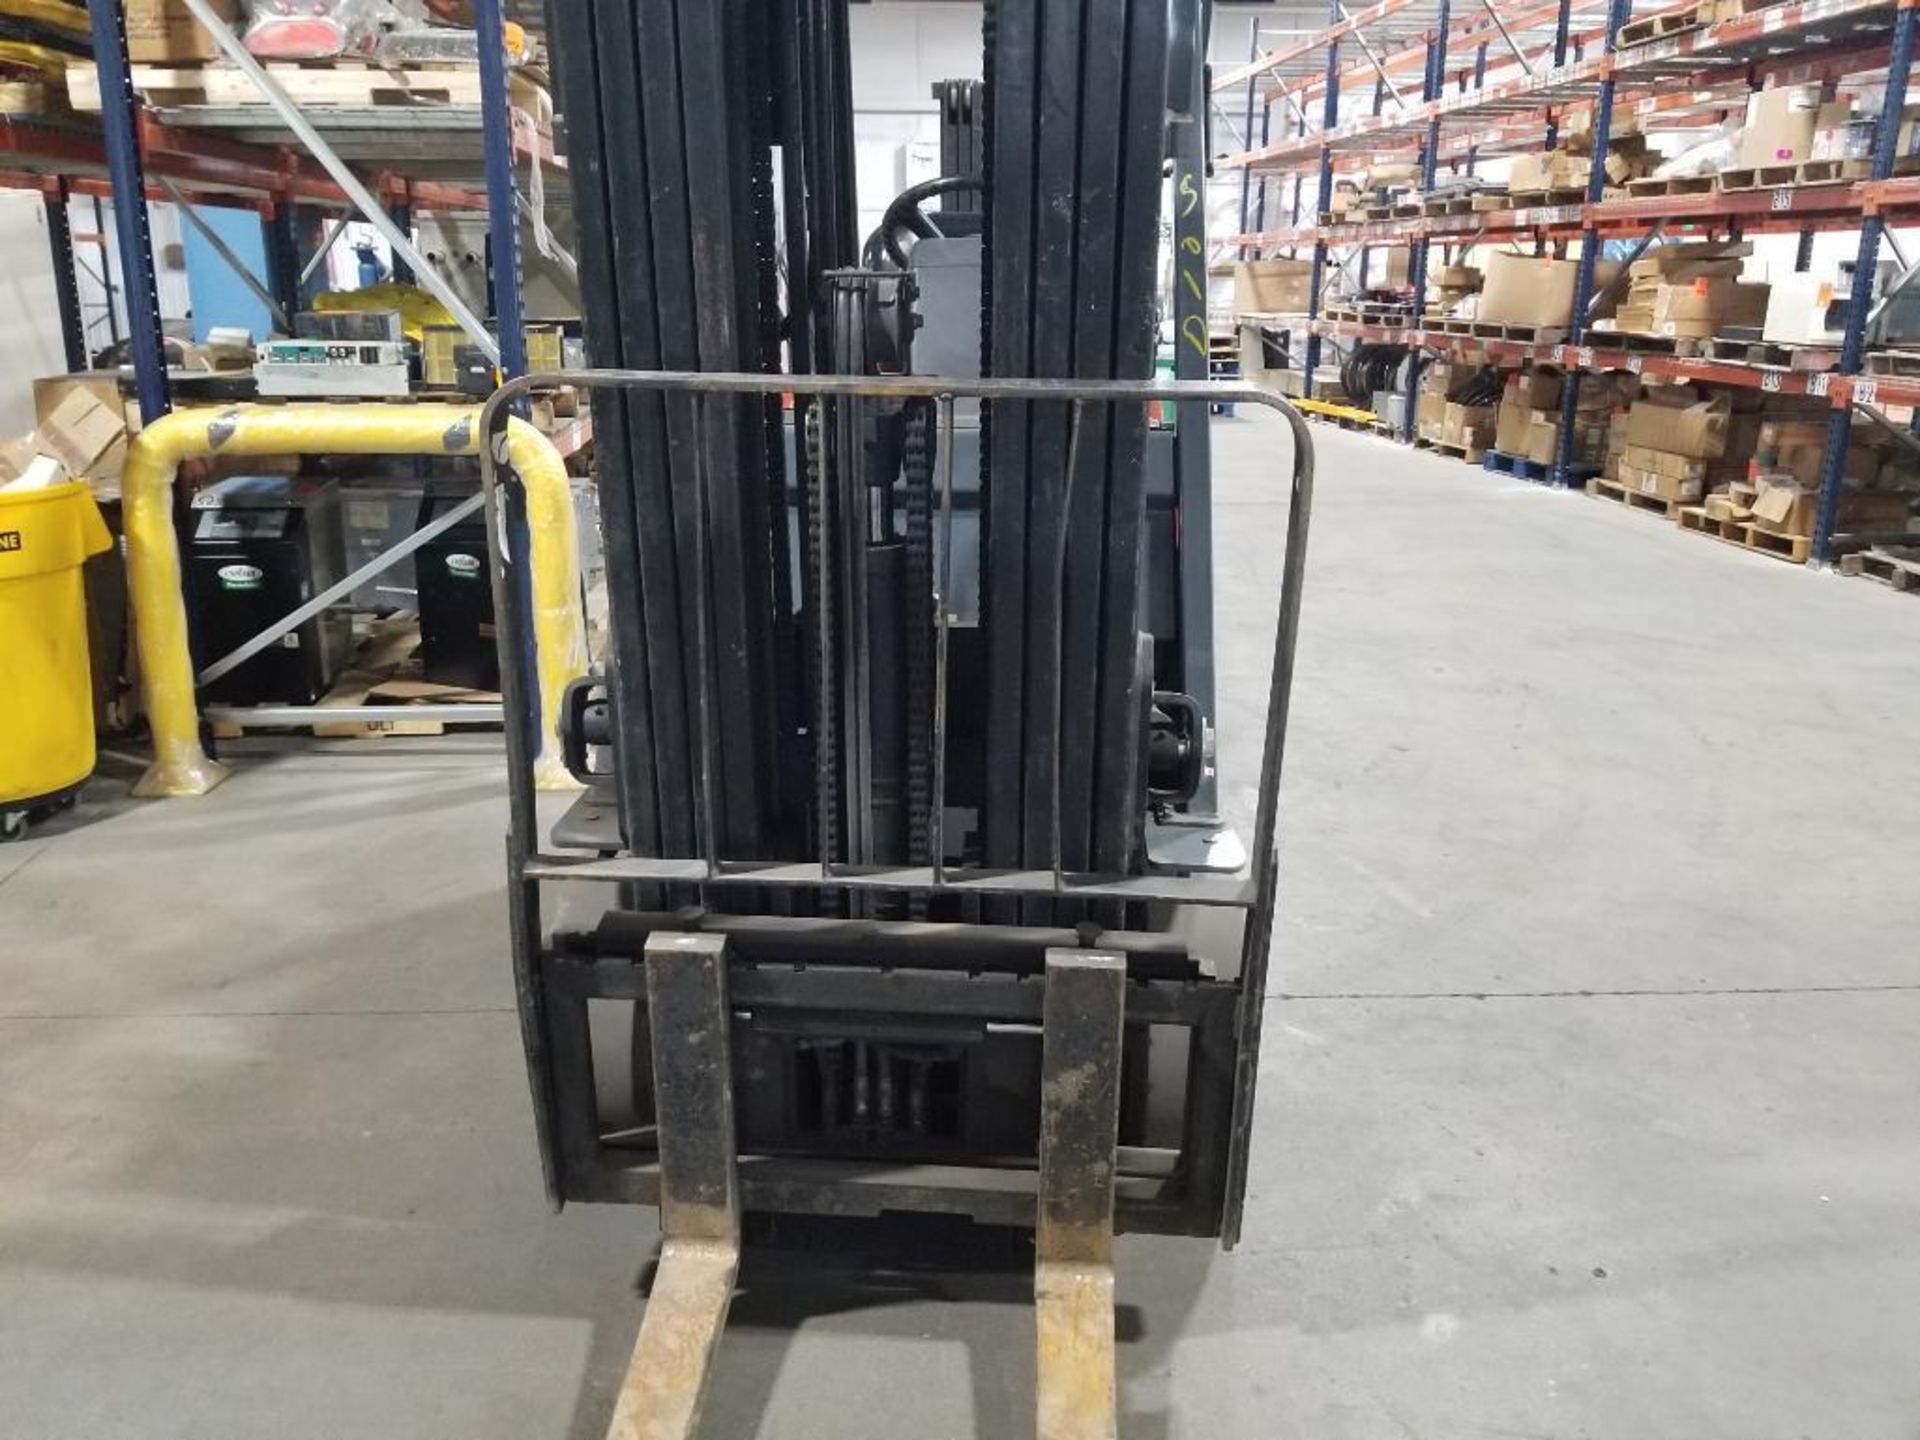 4000lb Toyota forklift. Electric, model 7FBCU25. 240in lift w/ side shift. Serial number 64096 - Image 20 of 20